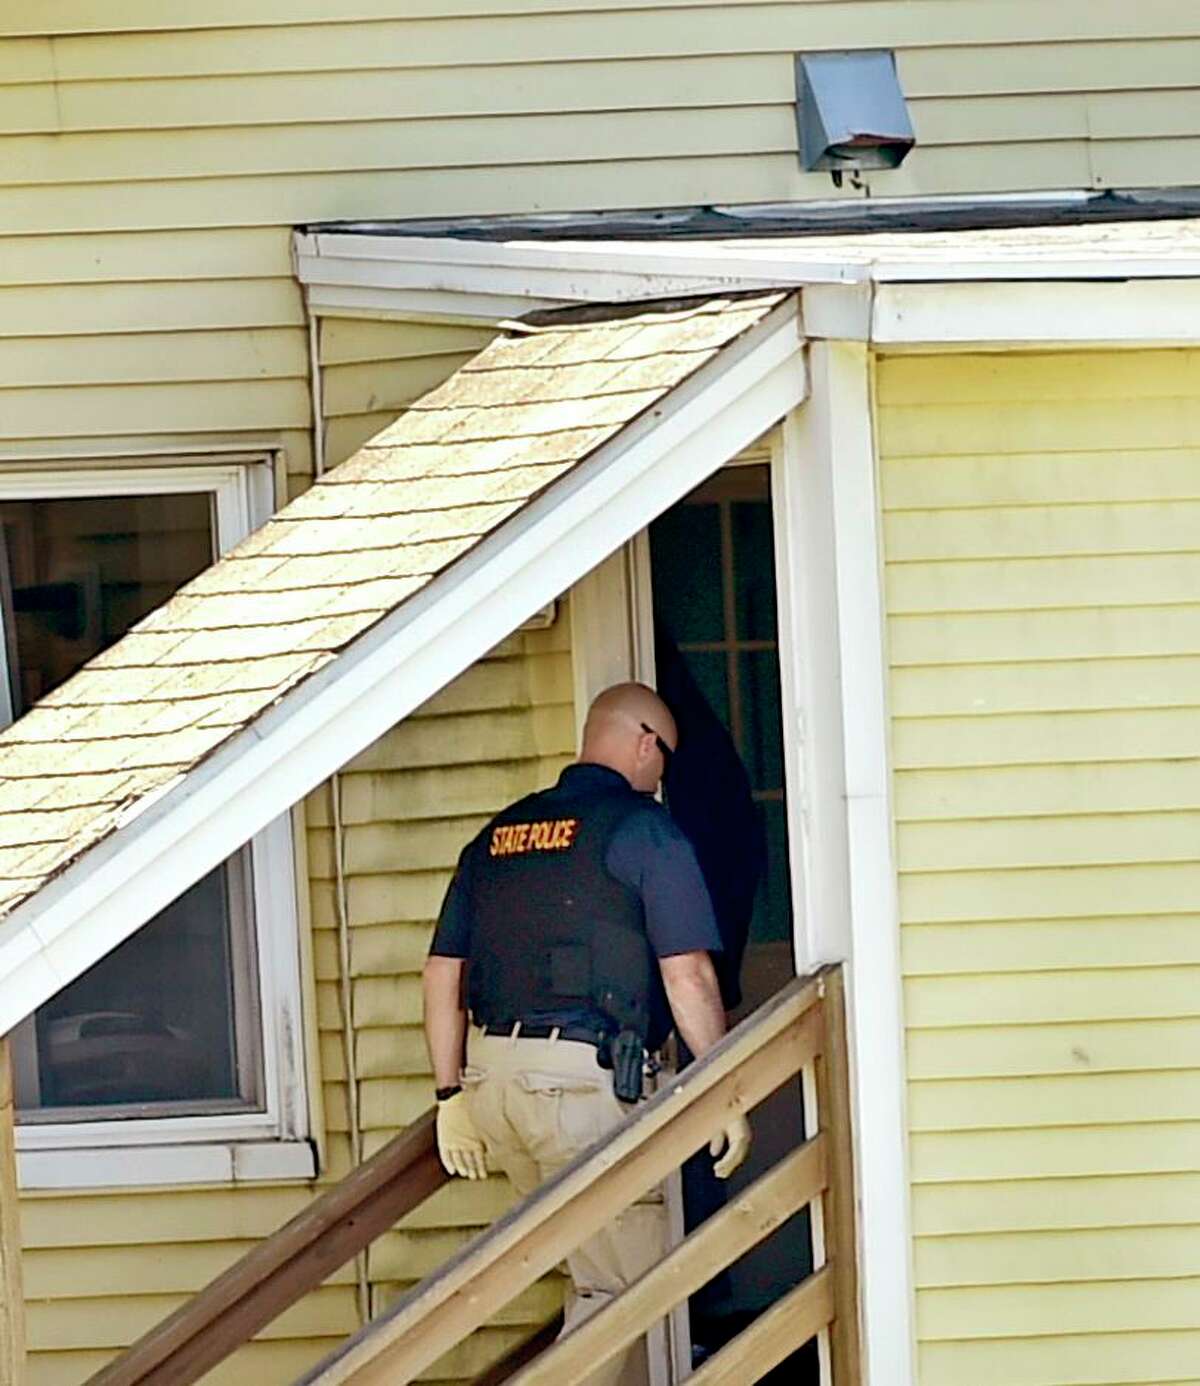 Derby, Connecticut - Sunday, May 24, 2020: Connecticut State Police enters a house on Roosevelt Drive in Derby Sunday afternoon where a male was found deceased in the house during the search for suspected murder Peter Manfredonia, 23, described as armed and dangerous. State Police said Manfredonia is believed to be armed with pistol and long guns. Manfredonia is wanted in a homicide and serious assault in northeastern Connecticut.